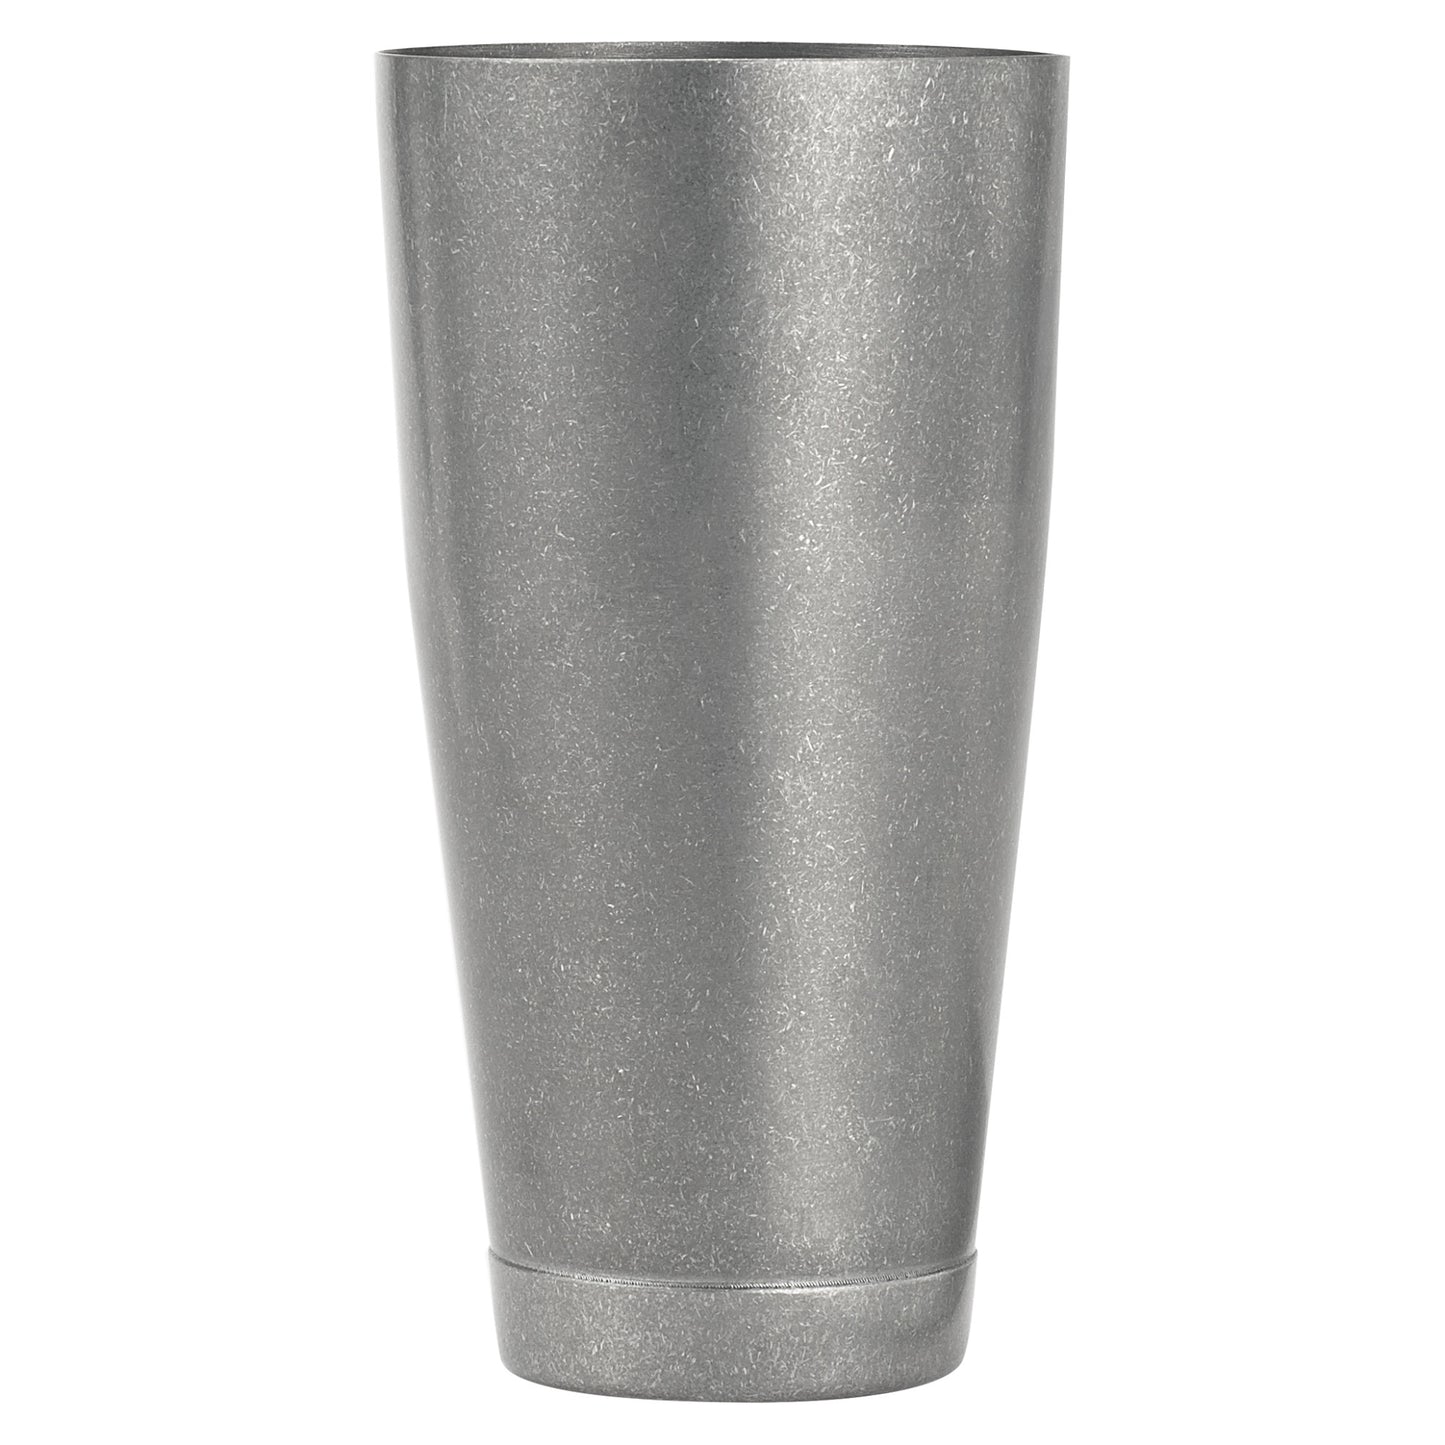 BASK-20CS - After5 20 oz Bar Shaker Cup, Crafted Steel